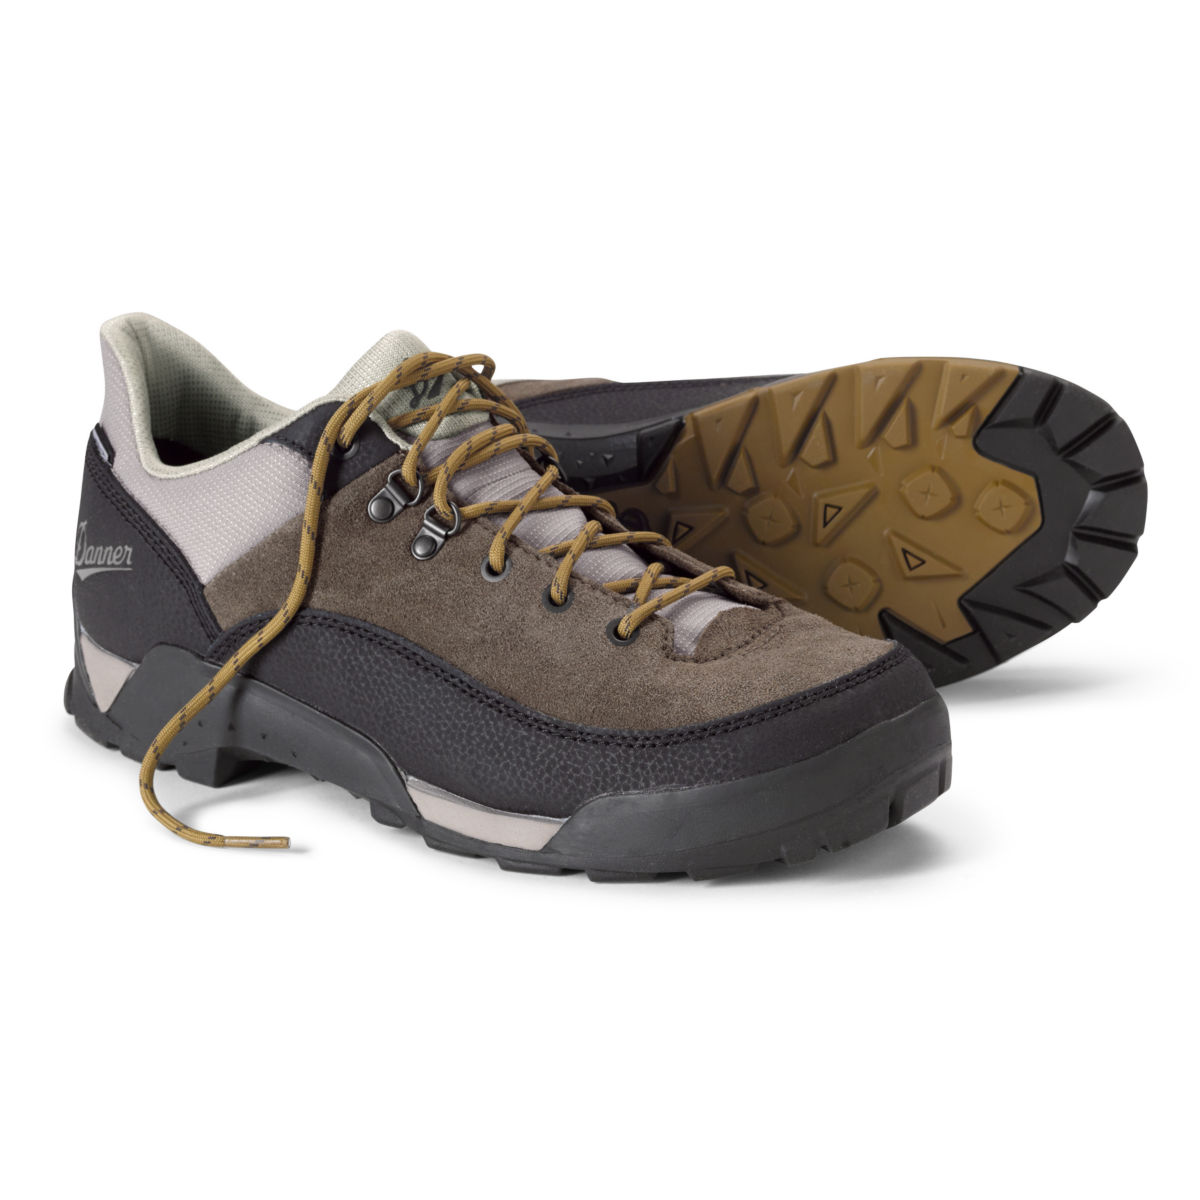 Danner Panorama Low Hiking Shoes - BLACK/OLIVEimage number 0